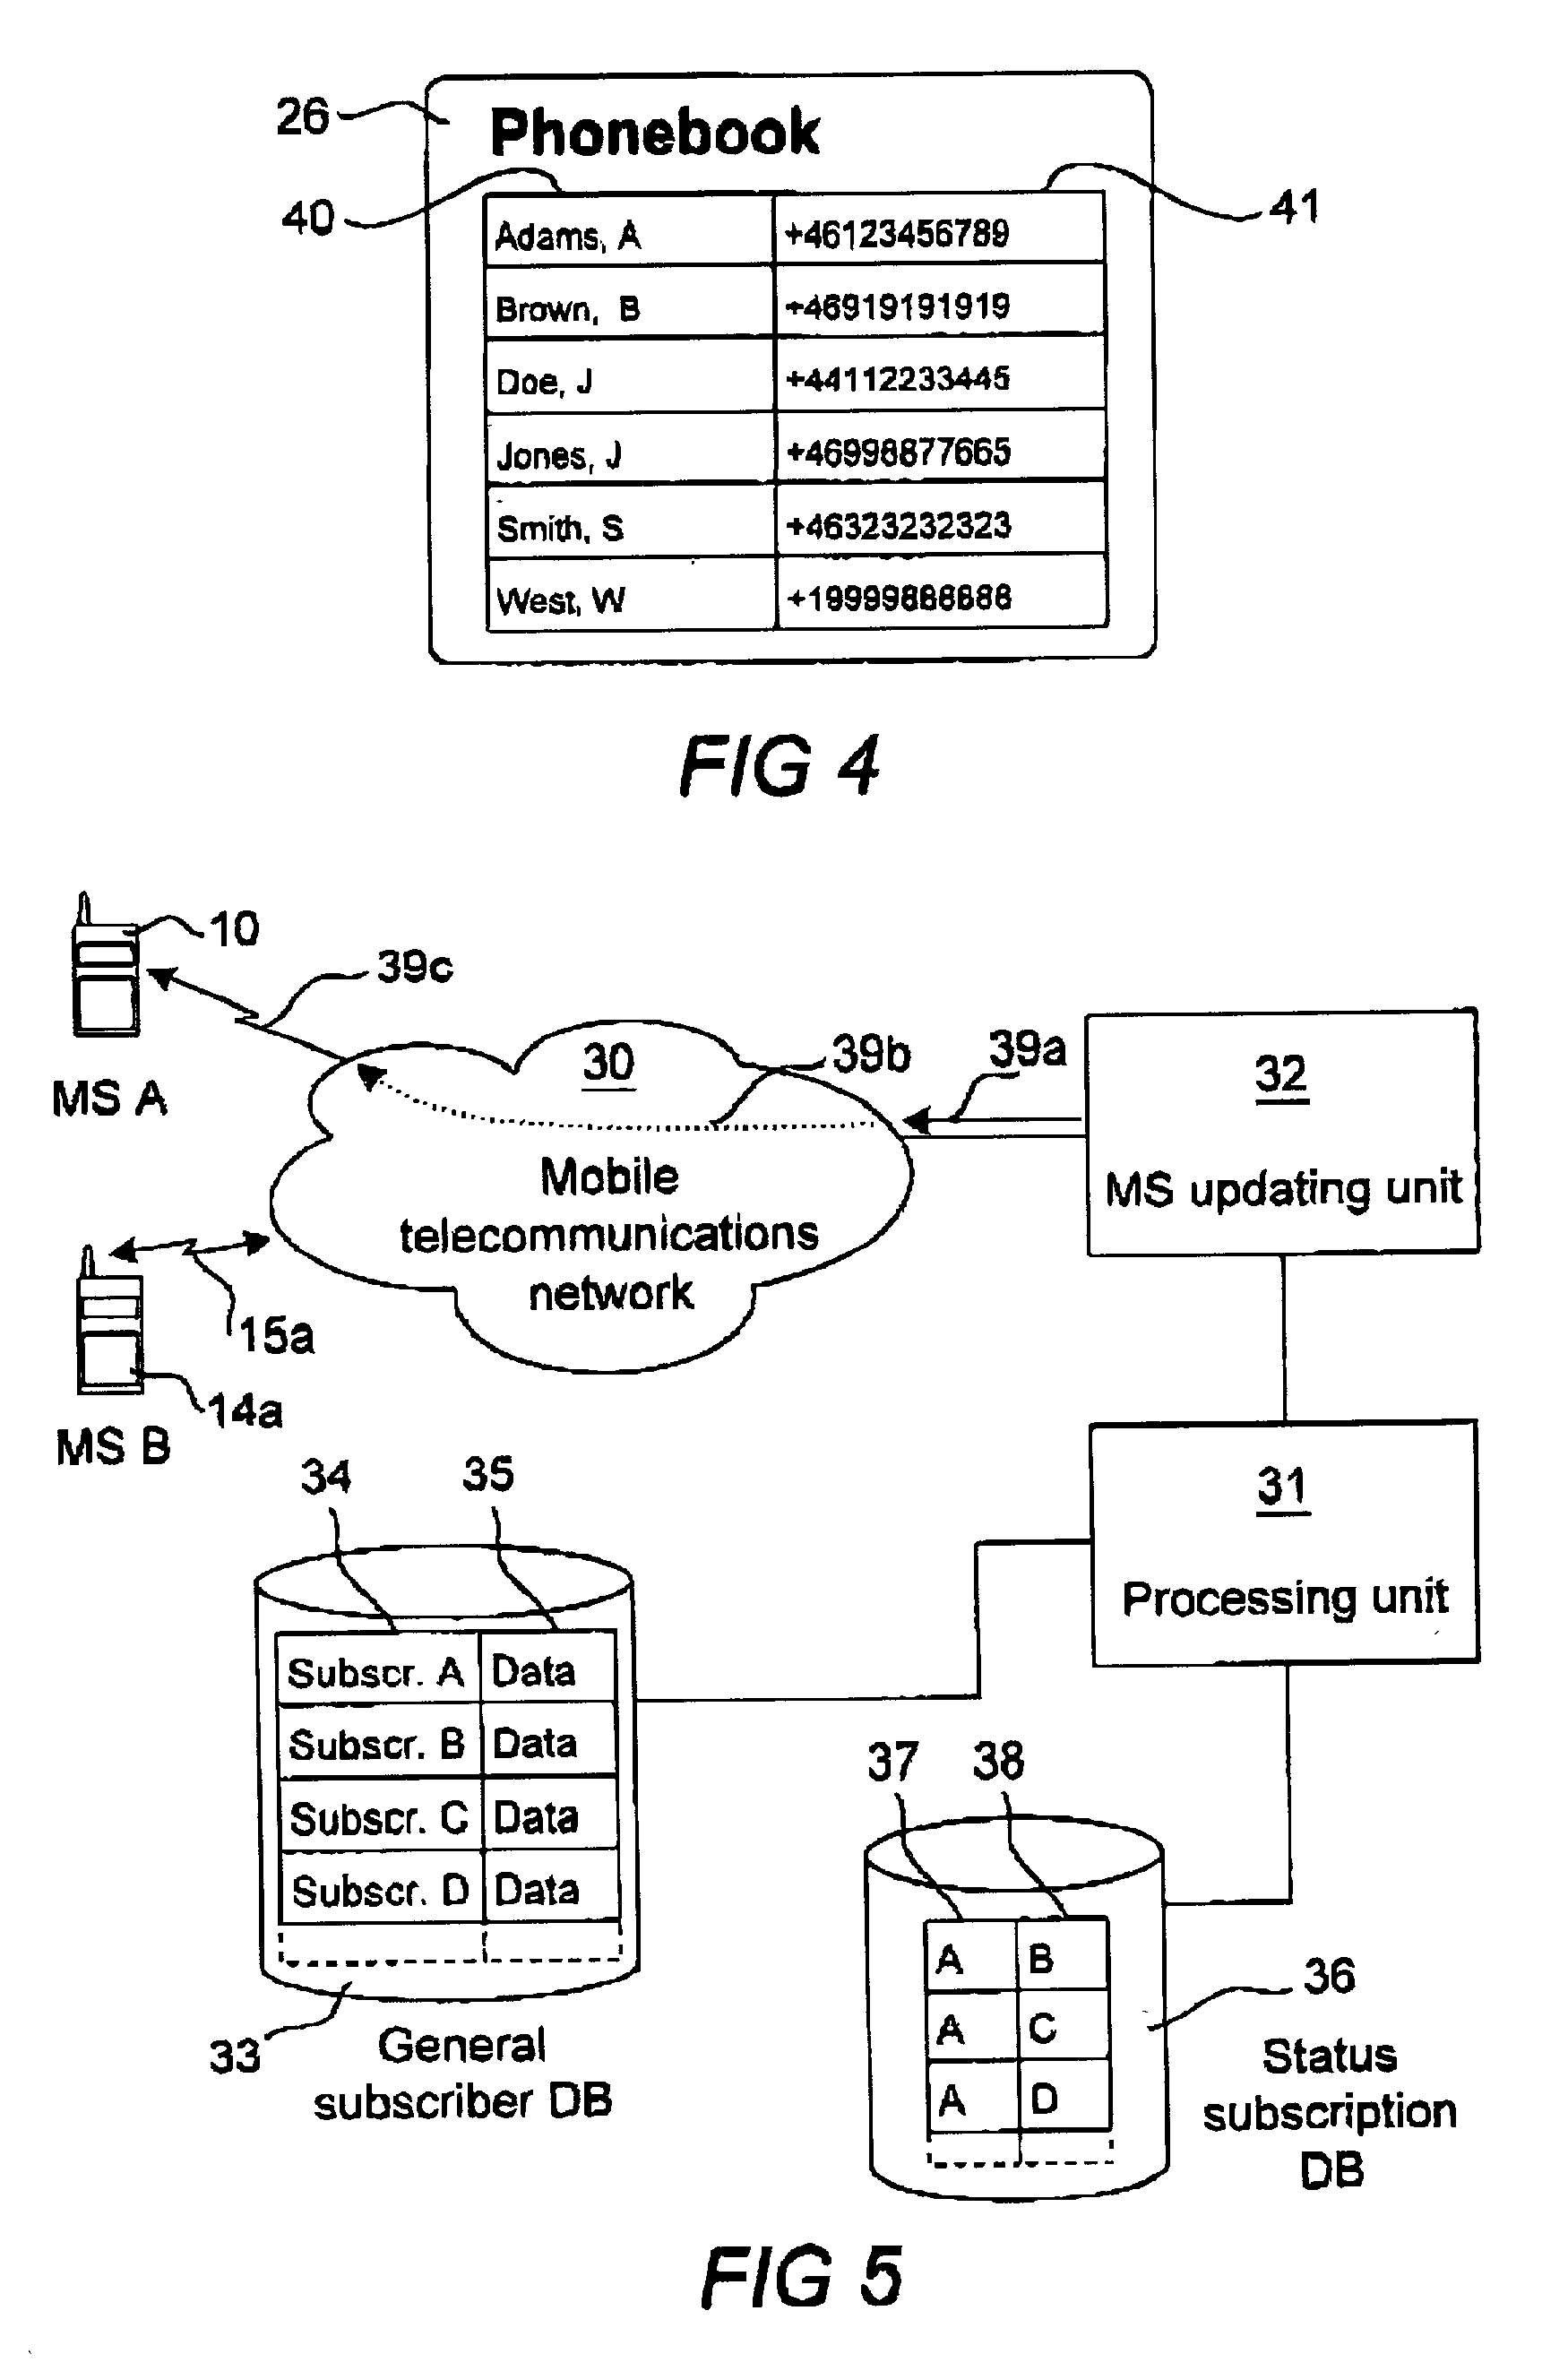 Apparatus and a method for providing operational status information between subscribers in a telecommunications network